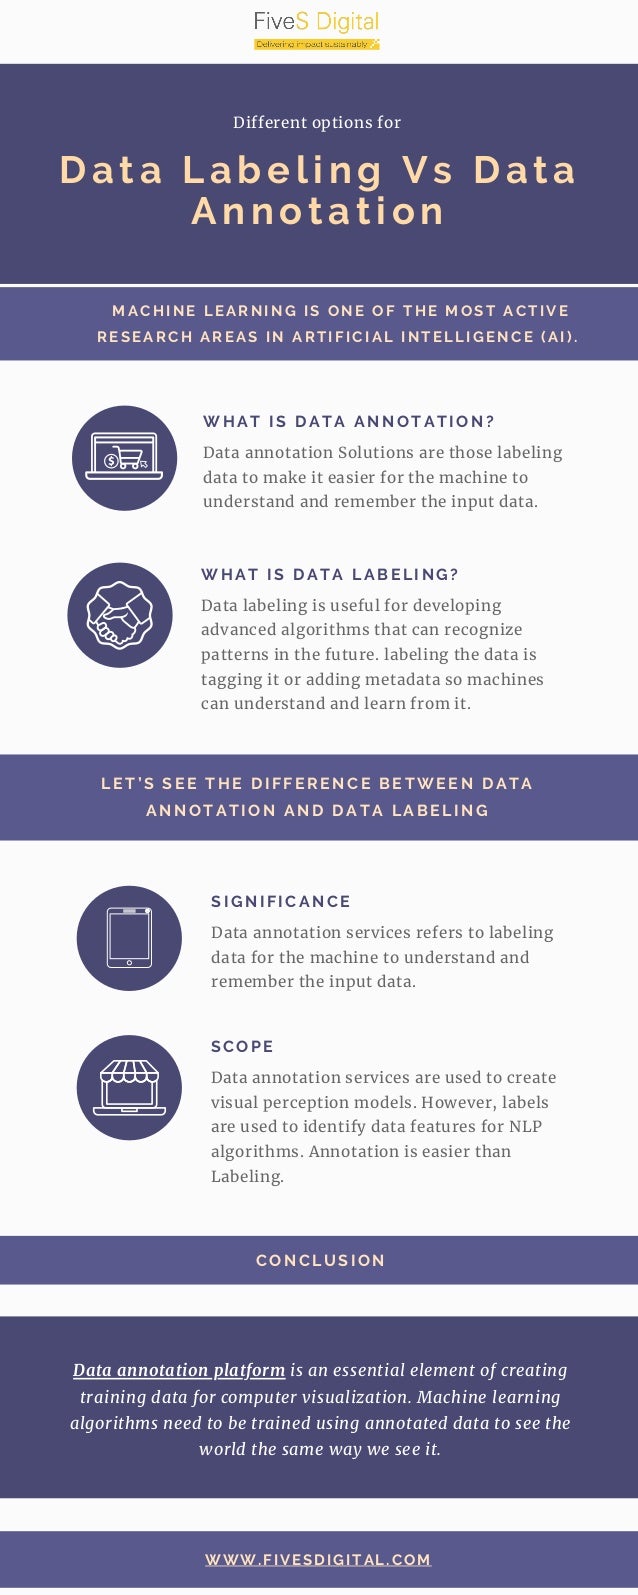 LET’S SEE THE DIFFERENCE BETWEEN DATA
ANNOTATION AND DATA LABELING
MACHINE LEARNING IS ONE OF THE MOST ACTIVE
RESEARCH AREAS IN ARTIFICIAL INTELLIGENCE (AI).
CONCLUSION
WWW.FIVESDIGITAL.COM
Data annotation services refers to labeling
data for the machine to understand and
remember the input data.
SIGNIFICANCE
Data annotation platform is an essential element of creating
training data for computer visualization. Machine learning
algorithms need to be trained using annotated data to see the
world the same way we see it.
Data annotation services are used to create
visual perception models. However, labels
are used to identify data features for NLP
algorithms. Annotation is easier than
Labeling.
SCOPE
Data Labeling Vs Data
Annotation
Different options for
Data labeling is useful for developing
advanced algorithms that can recognize
patterns in the future. labeling the data is
tagging it or adding metadata so machines
can understand and learn from it.
WHAT IS DATA LABELING?
Data annotation Solutions are those labeling
data to make it easier for the machine to
understand and remember the input data.
WHAT IS DATA ANNOTATION?
 